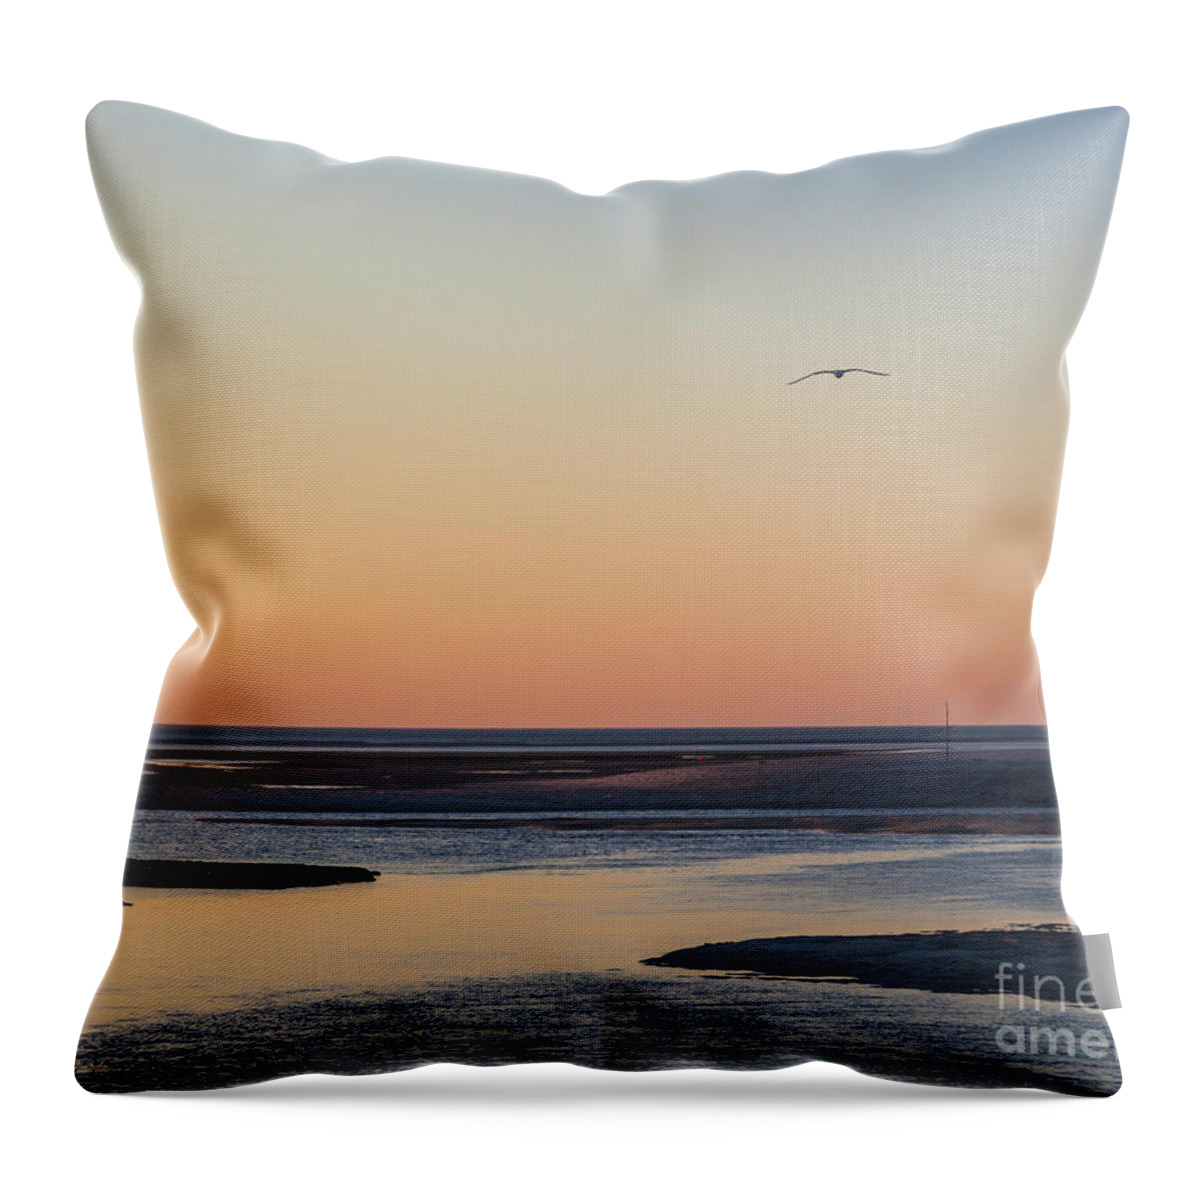 Soft Summer Eve Throw Pillow featuring the photograph Soft Summer Eve by Michelle Constantine